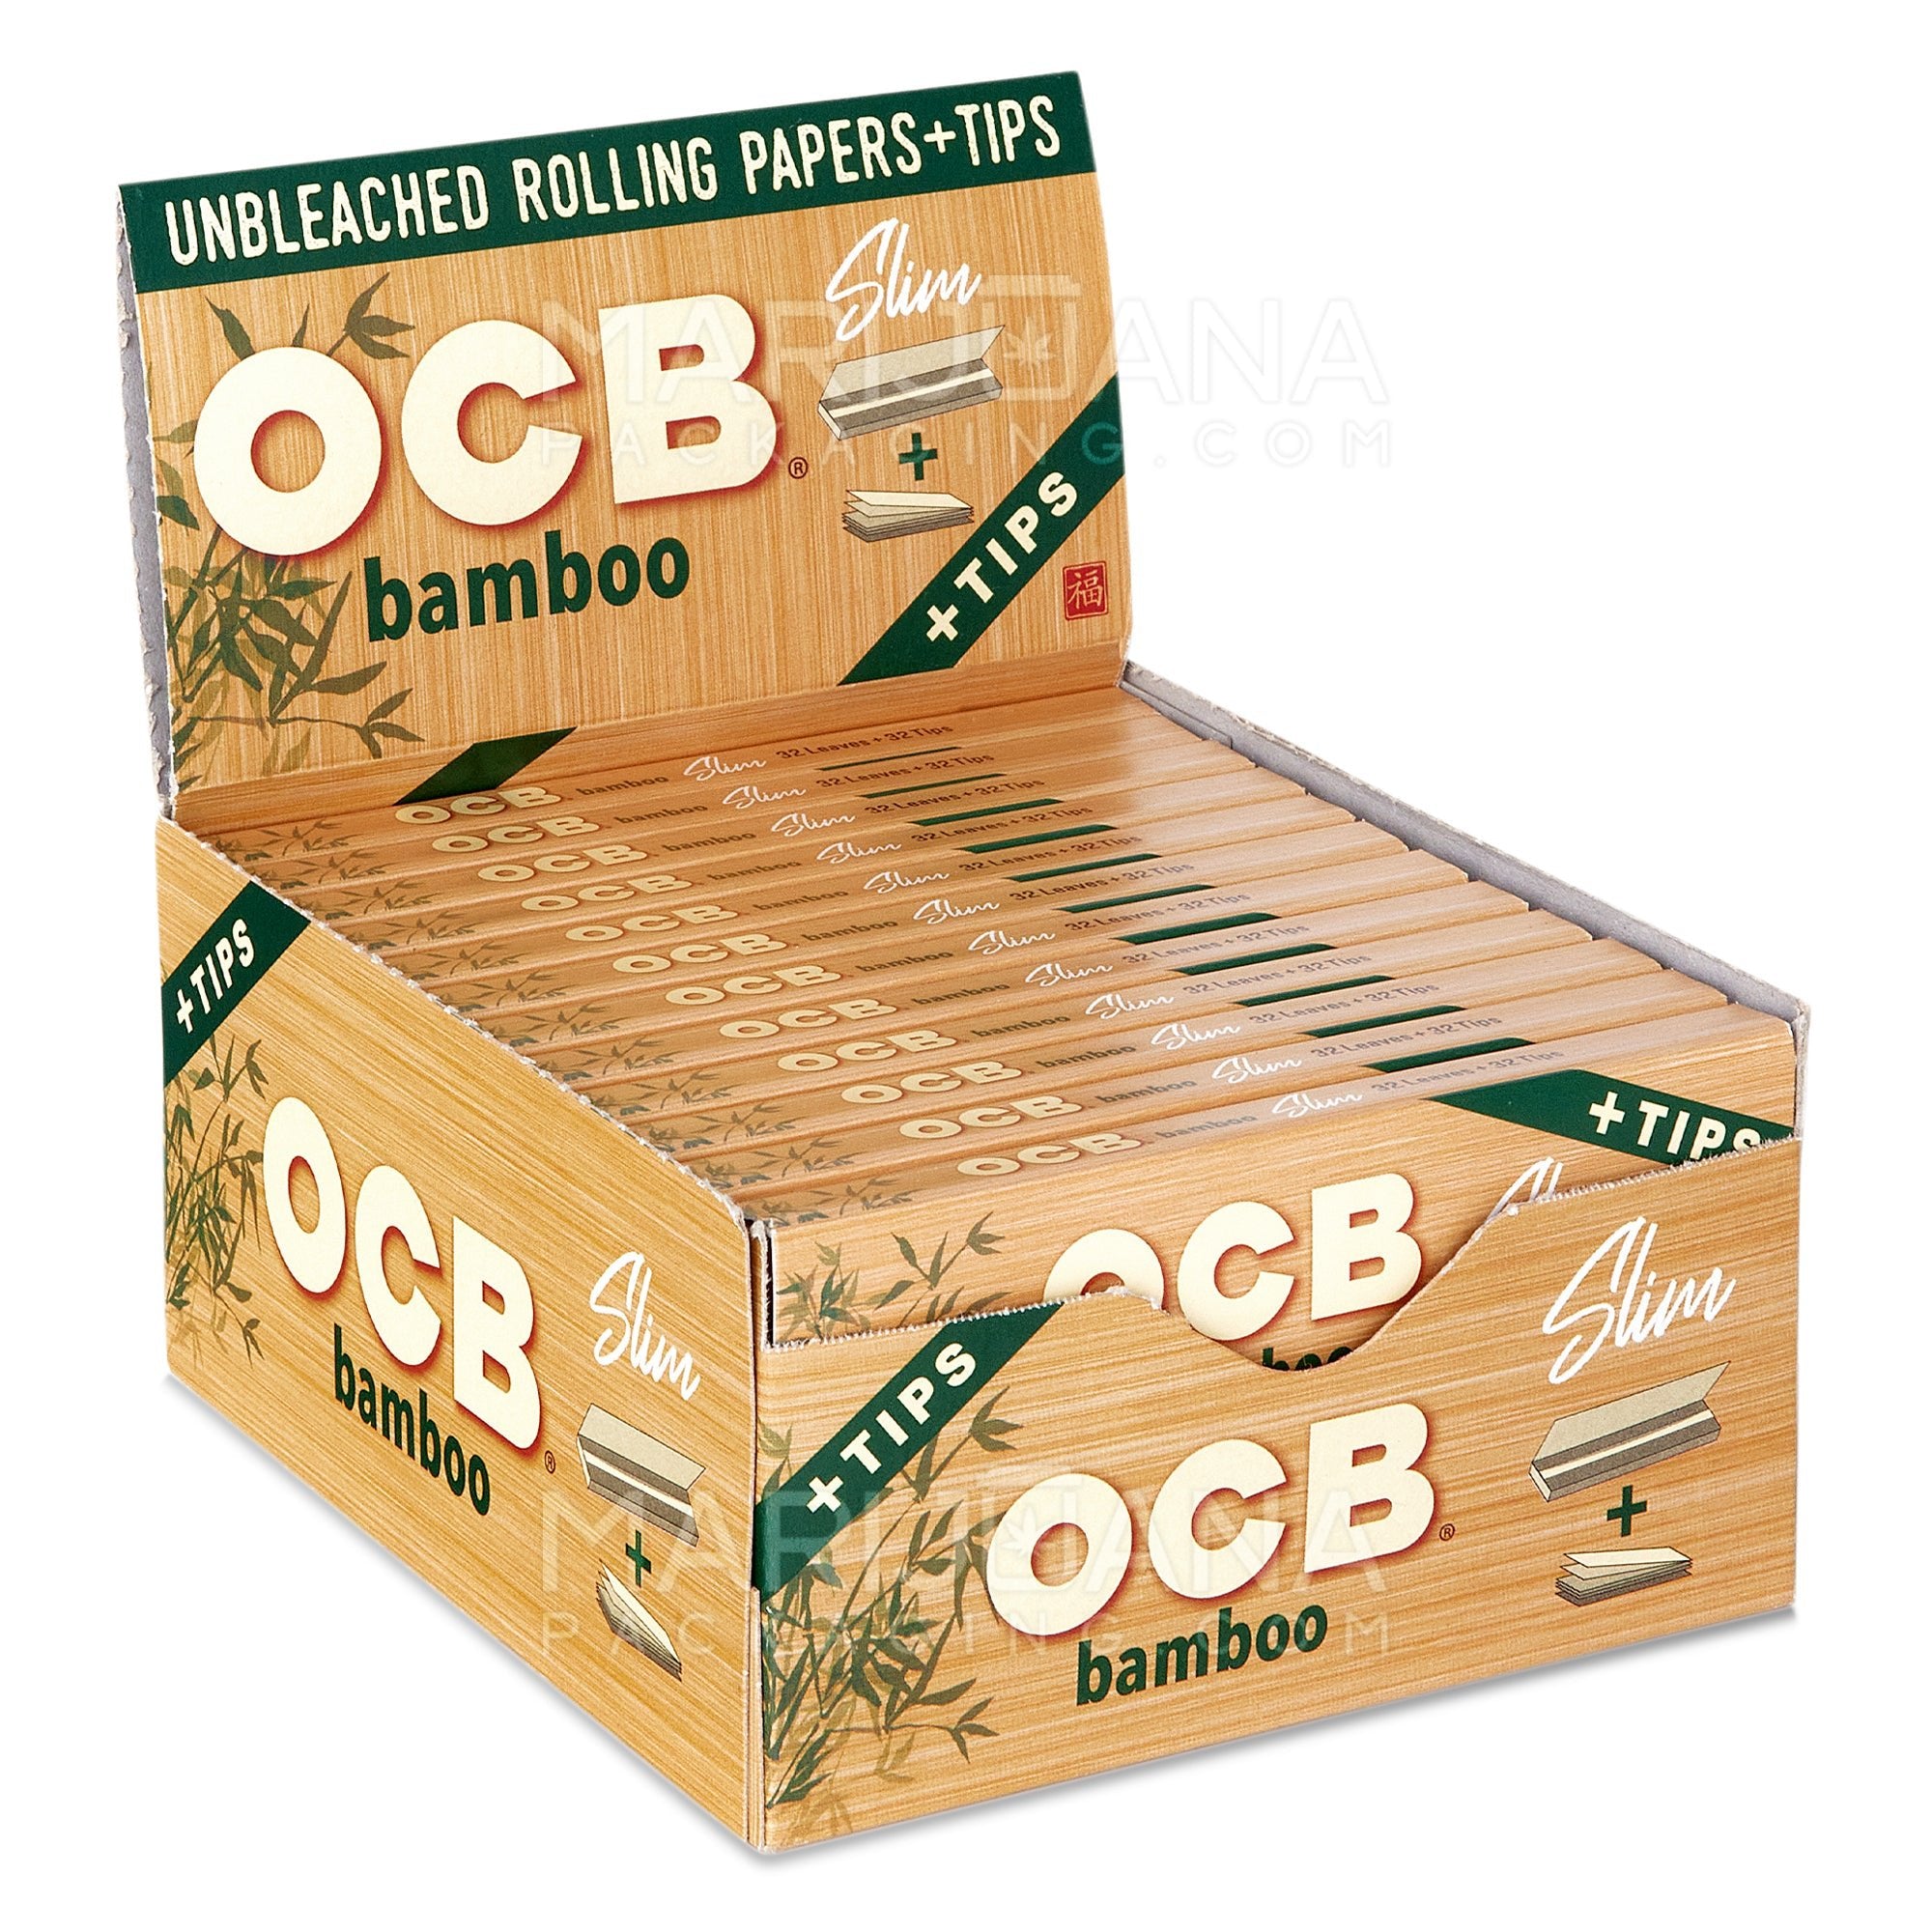 OCB | 'Retail Display' Slim Rolling Papers + Filter Tips | 109mm - Bamboo - 24 Count - 1